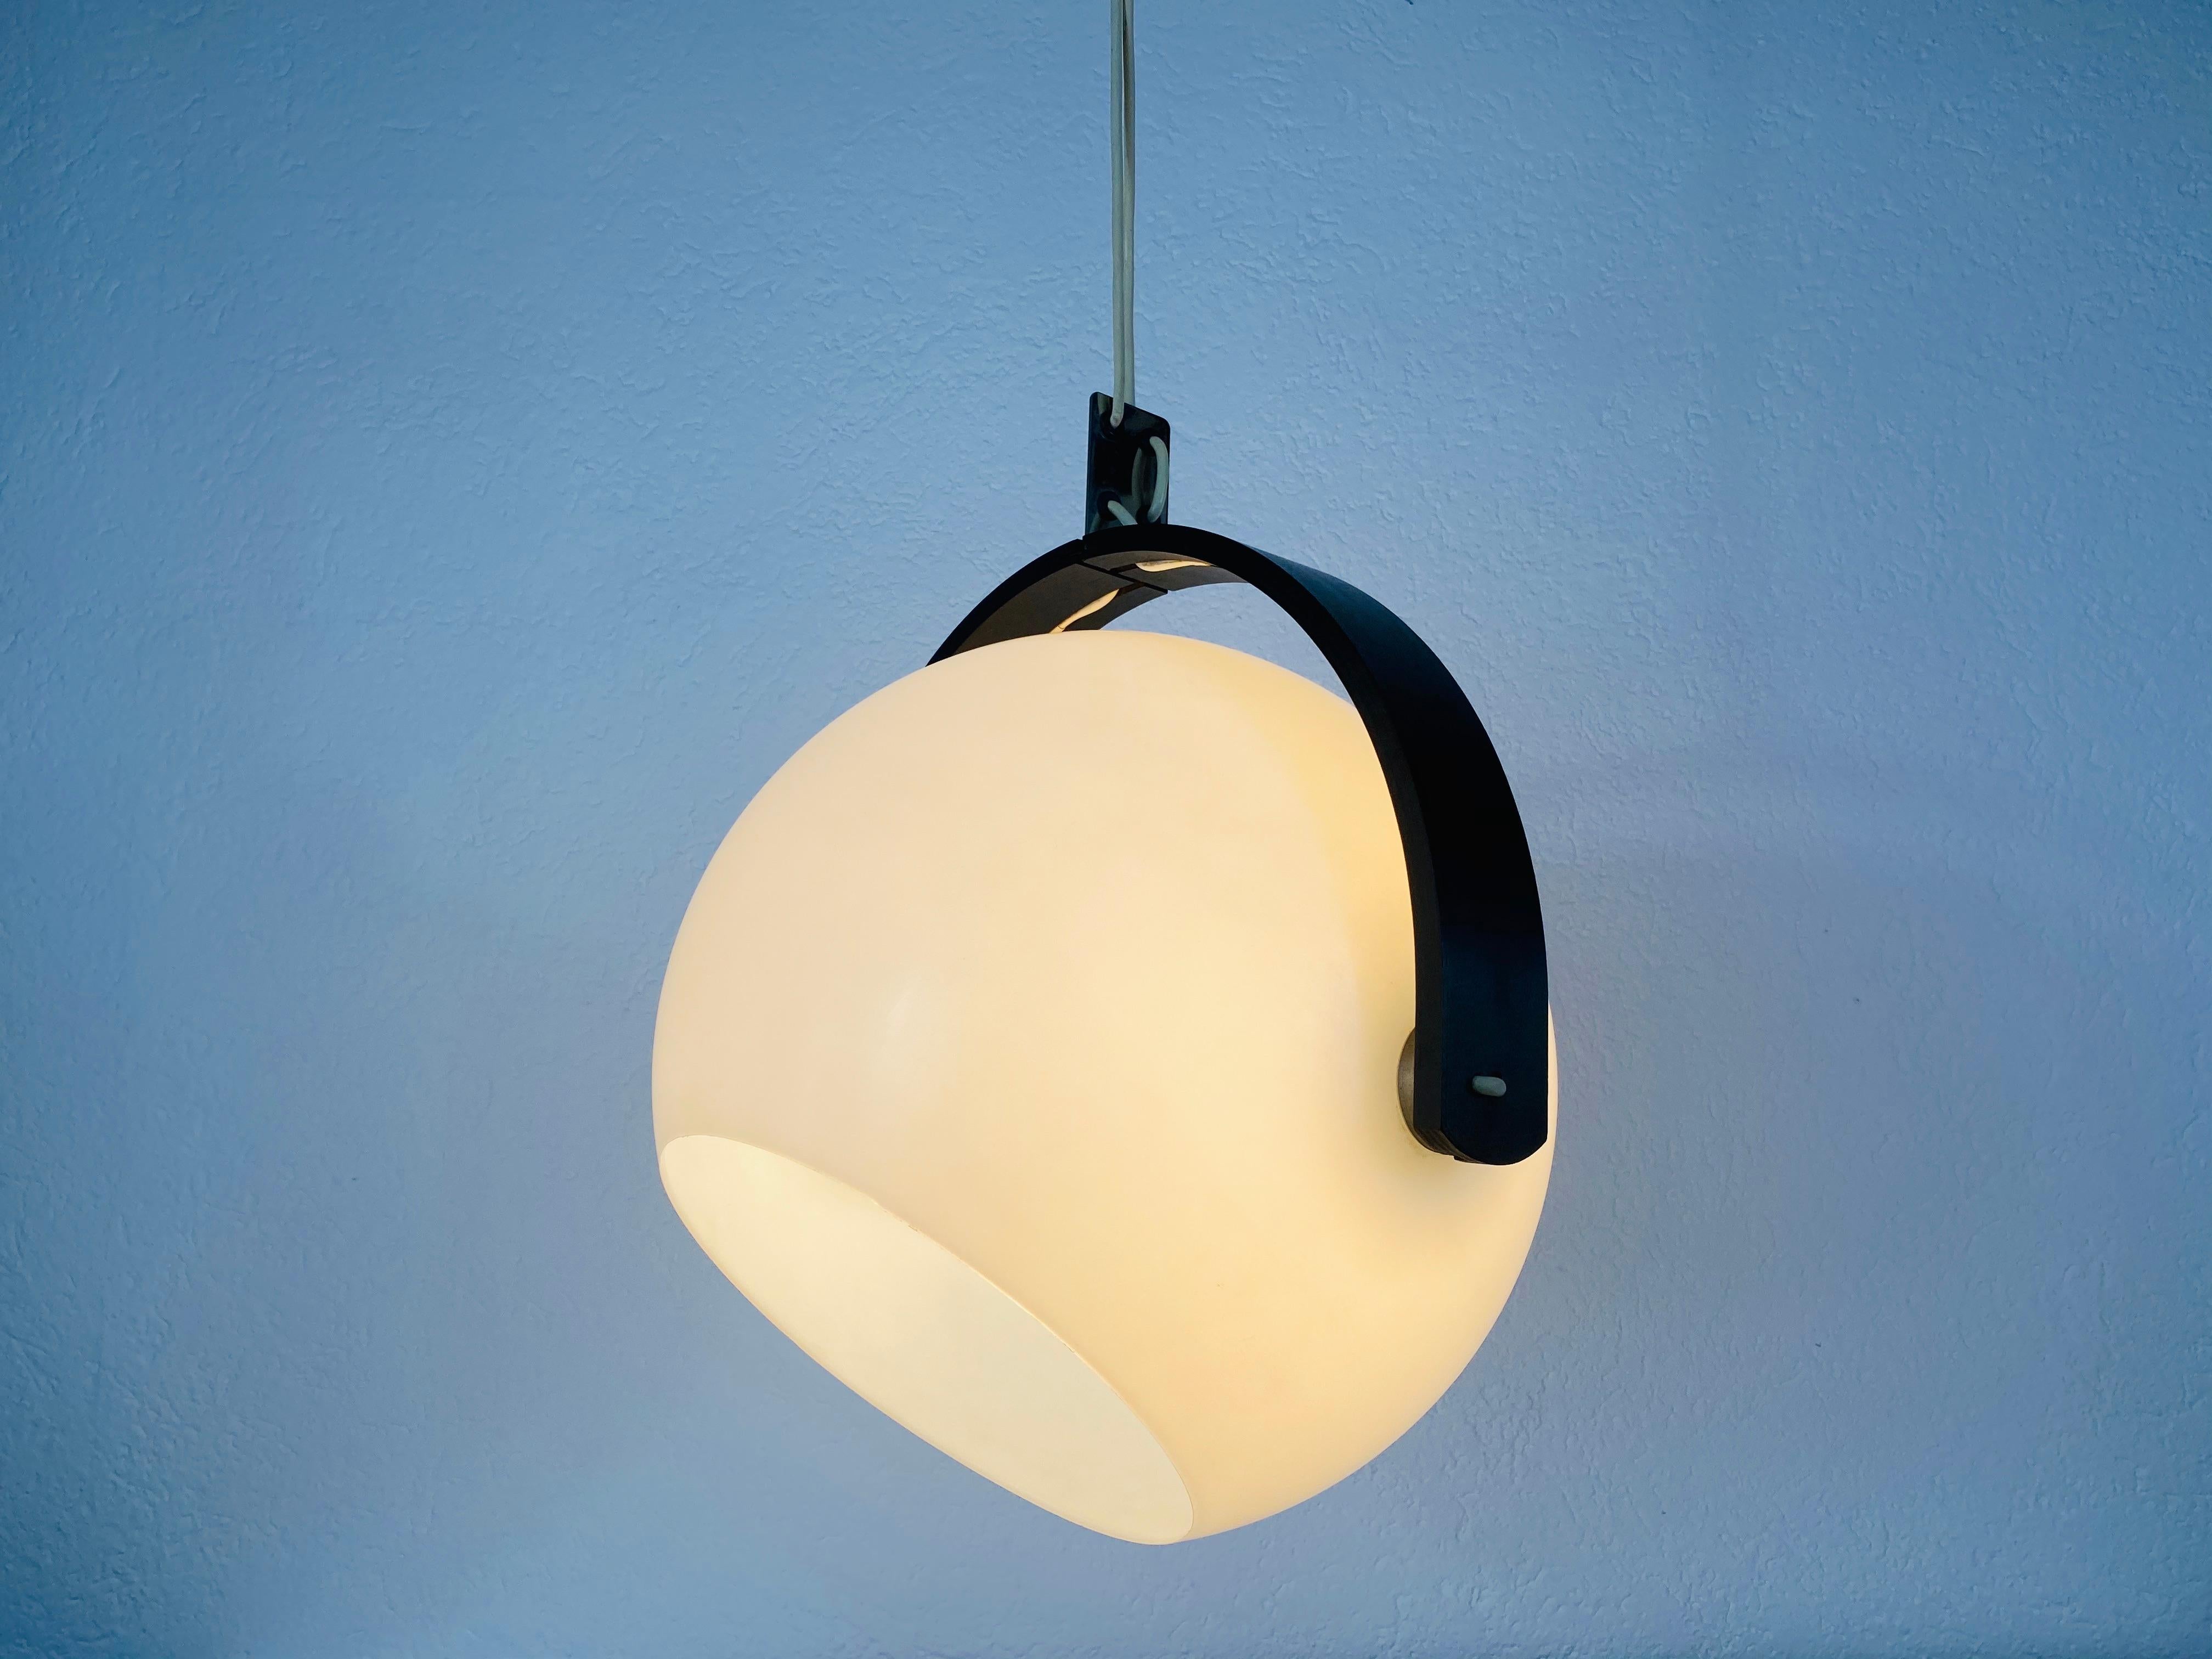 Black Wood and White Plastic Pendant Lamp by Temde, 1970s For Sale 2